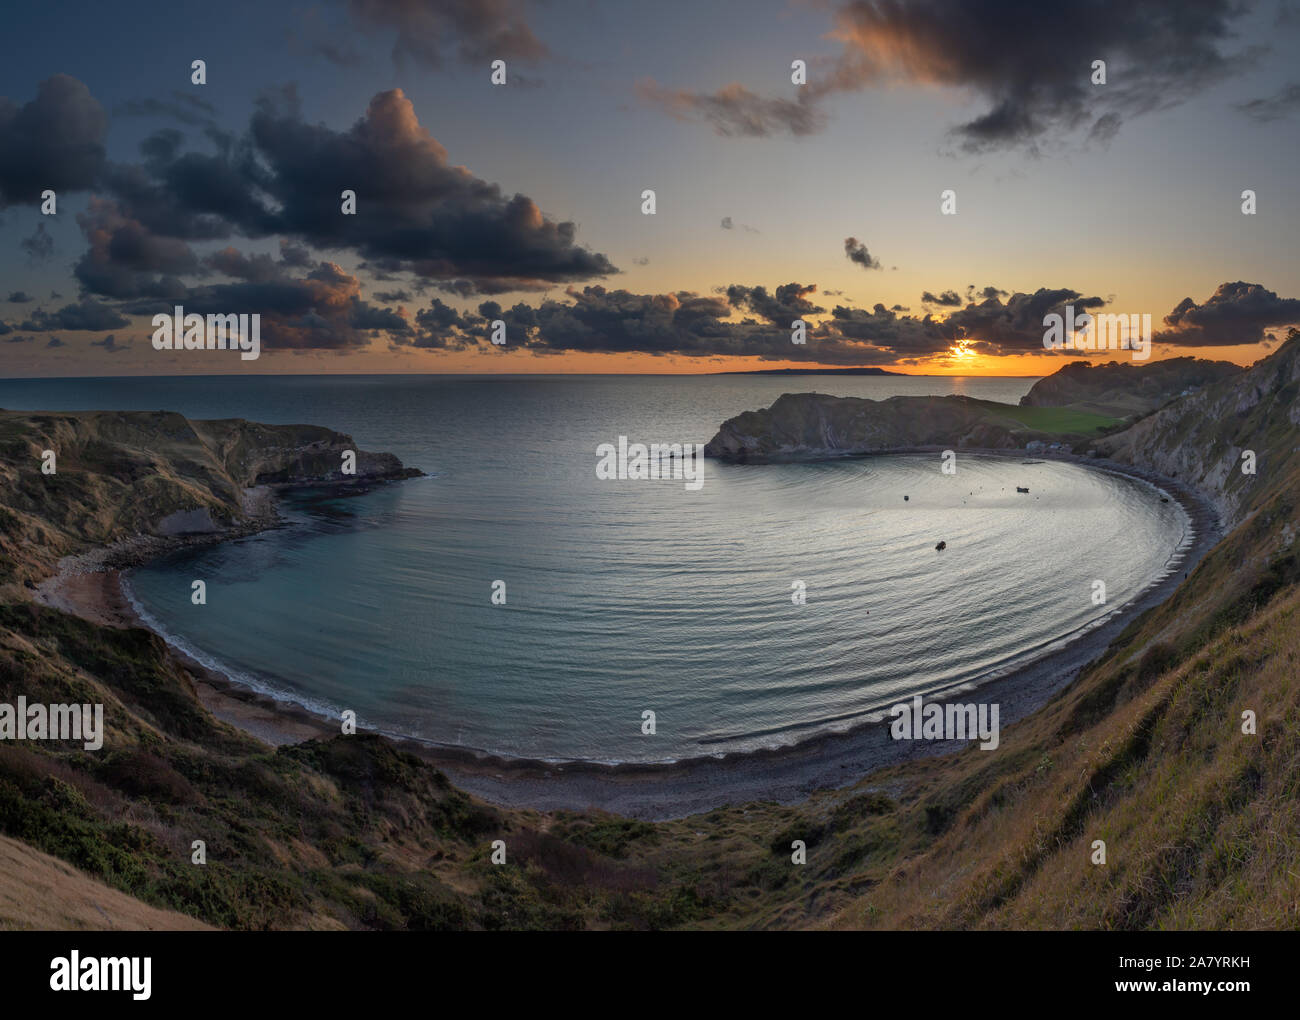 Lulworth Cove Dorset England Panoramic view of Lulworth Cove at Sunset. Lulworth Cove is one of the best known parts of Dorset's Jurassic Coast. Stock Photo